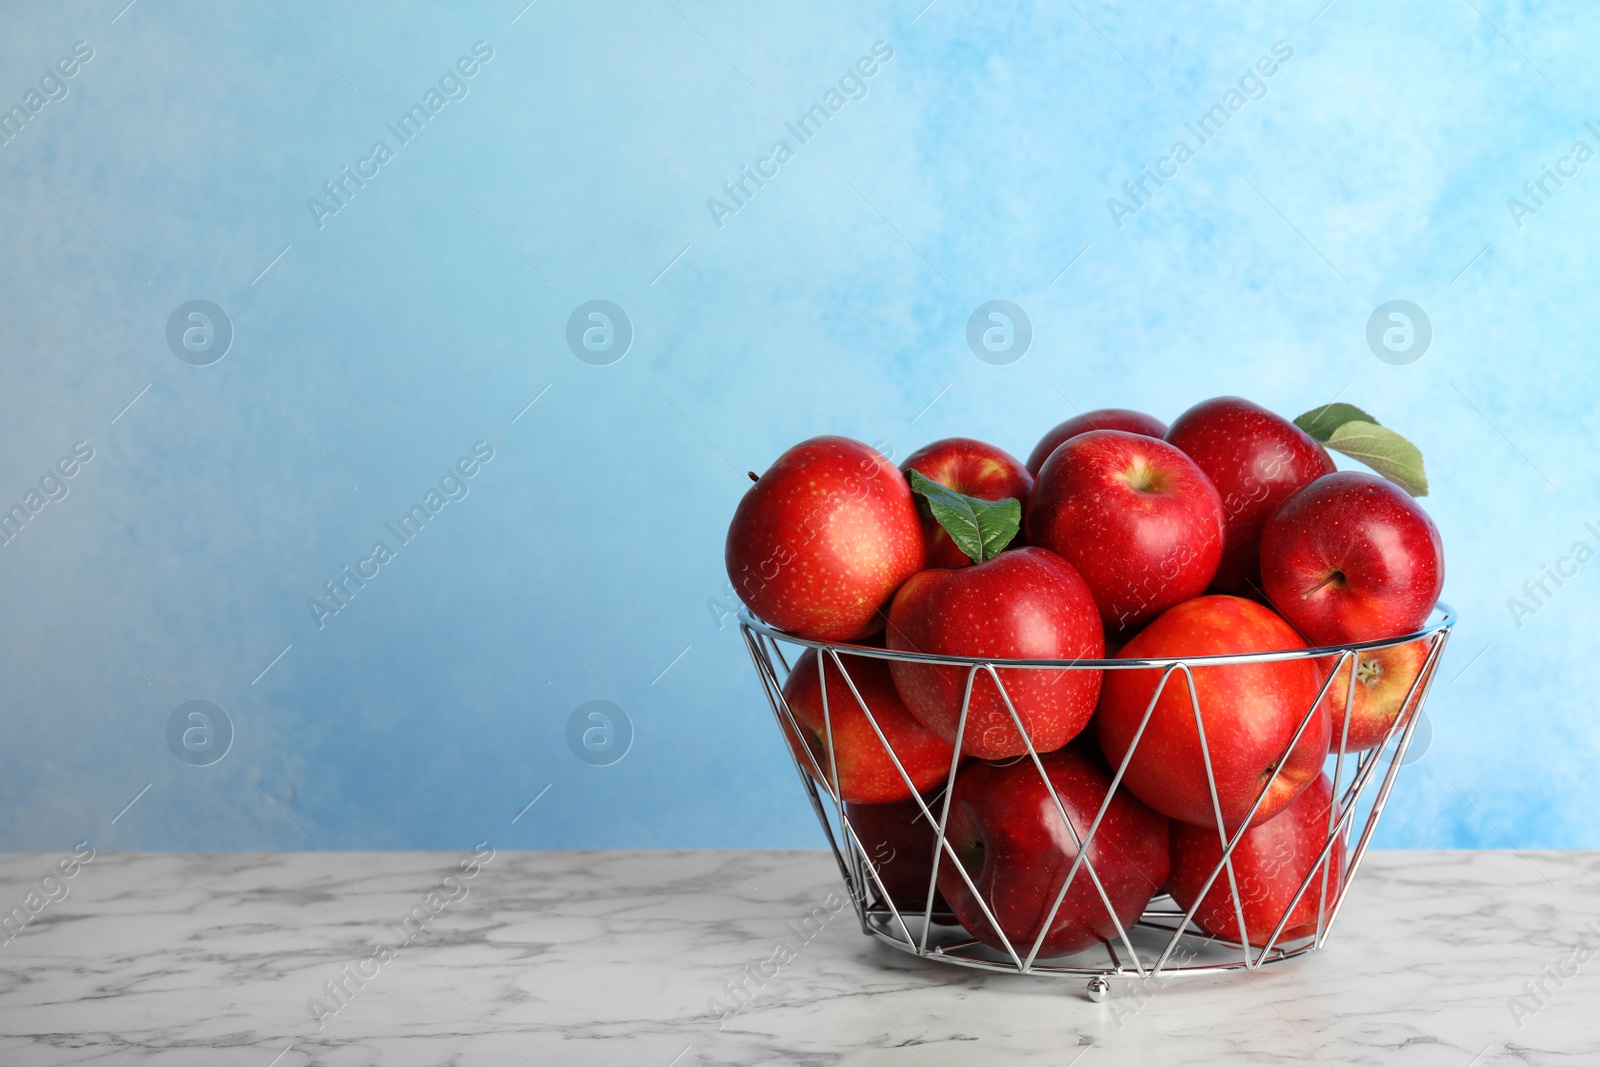 Photo of Juicy red apples in metal basket on table. Space for text